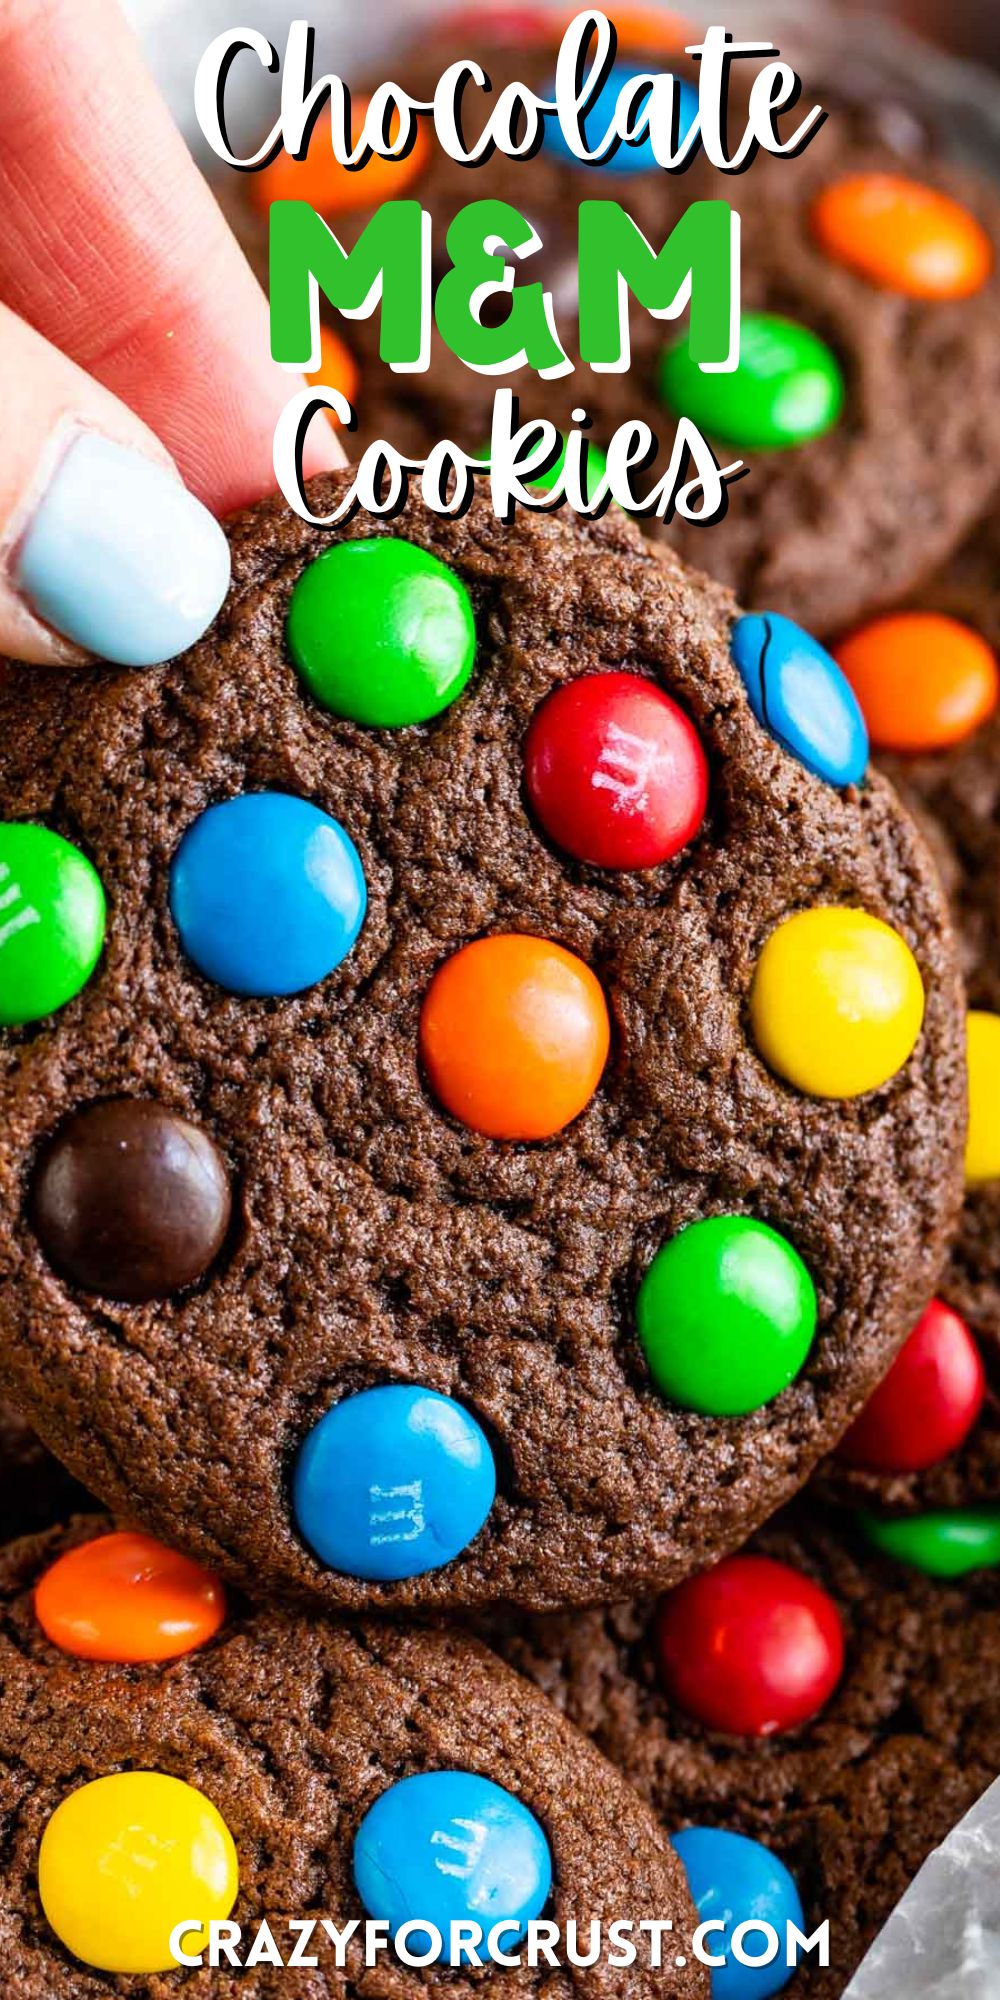 stacked chocolate cookies with colorful m&ms baked in and words on top